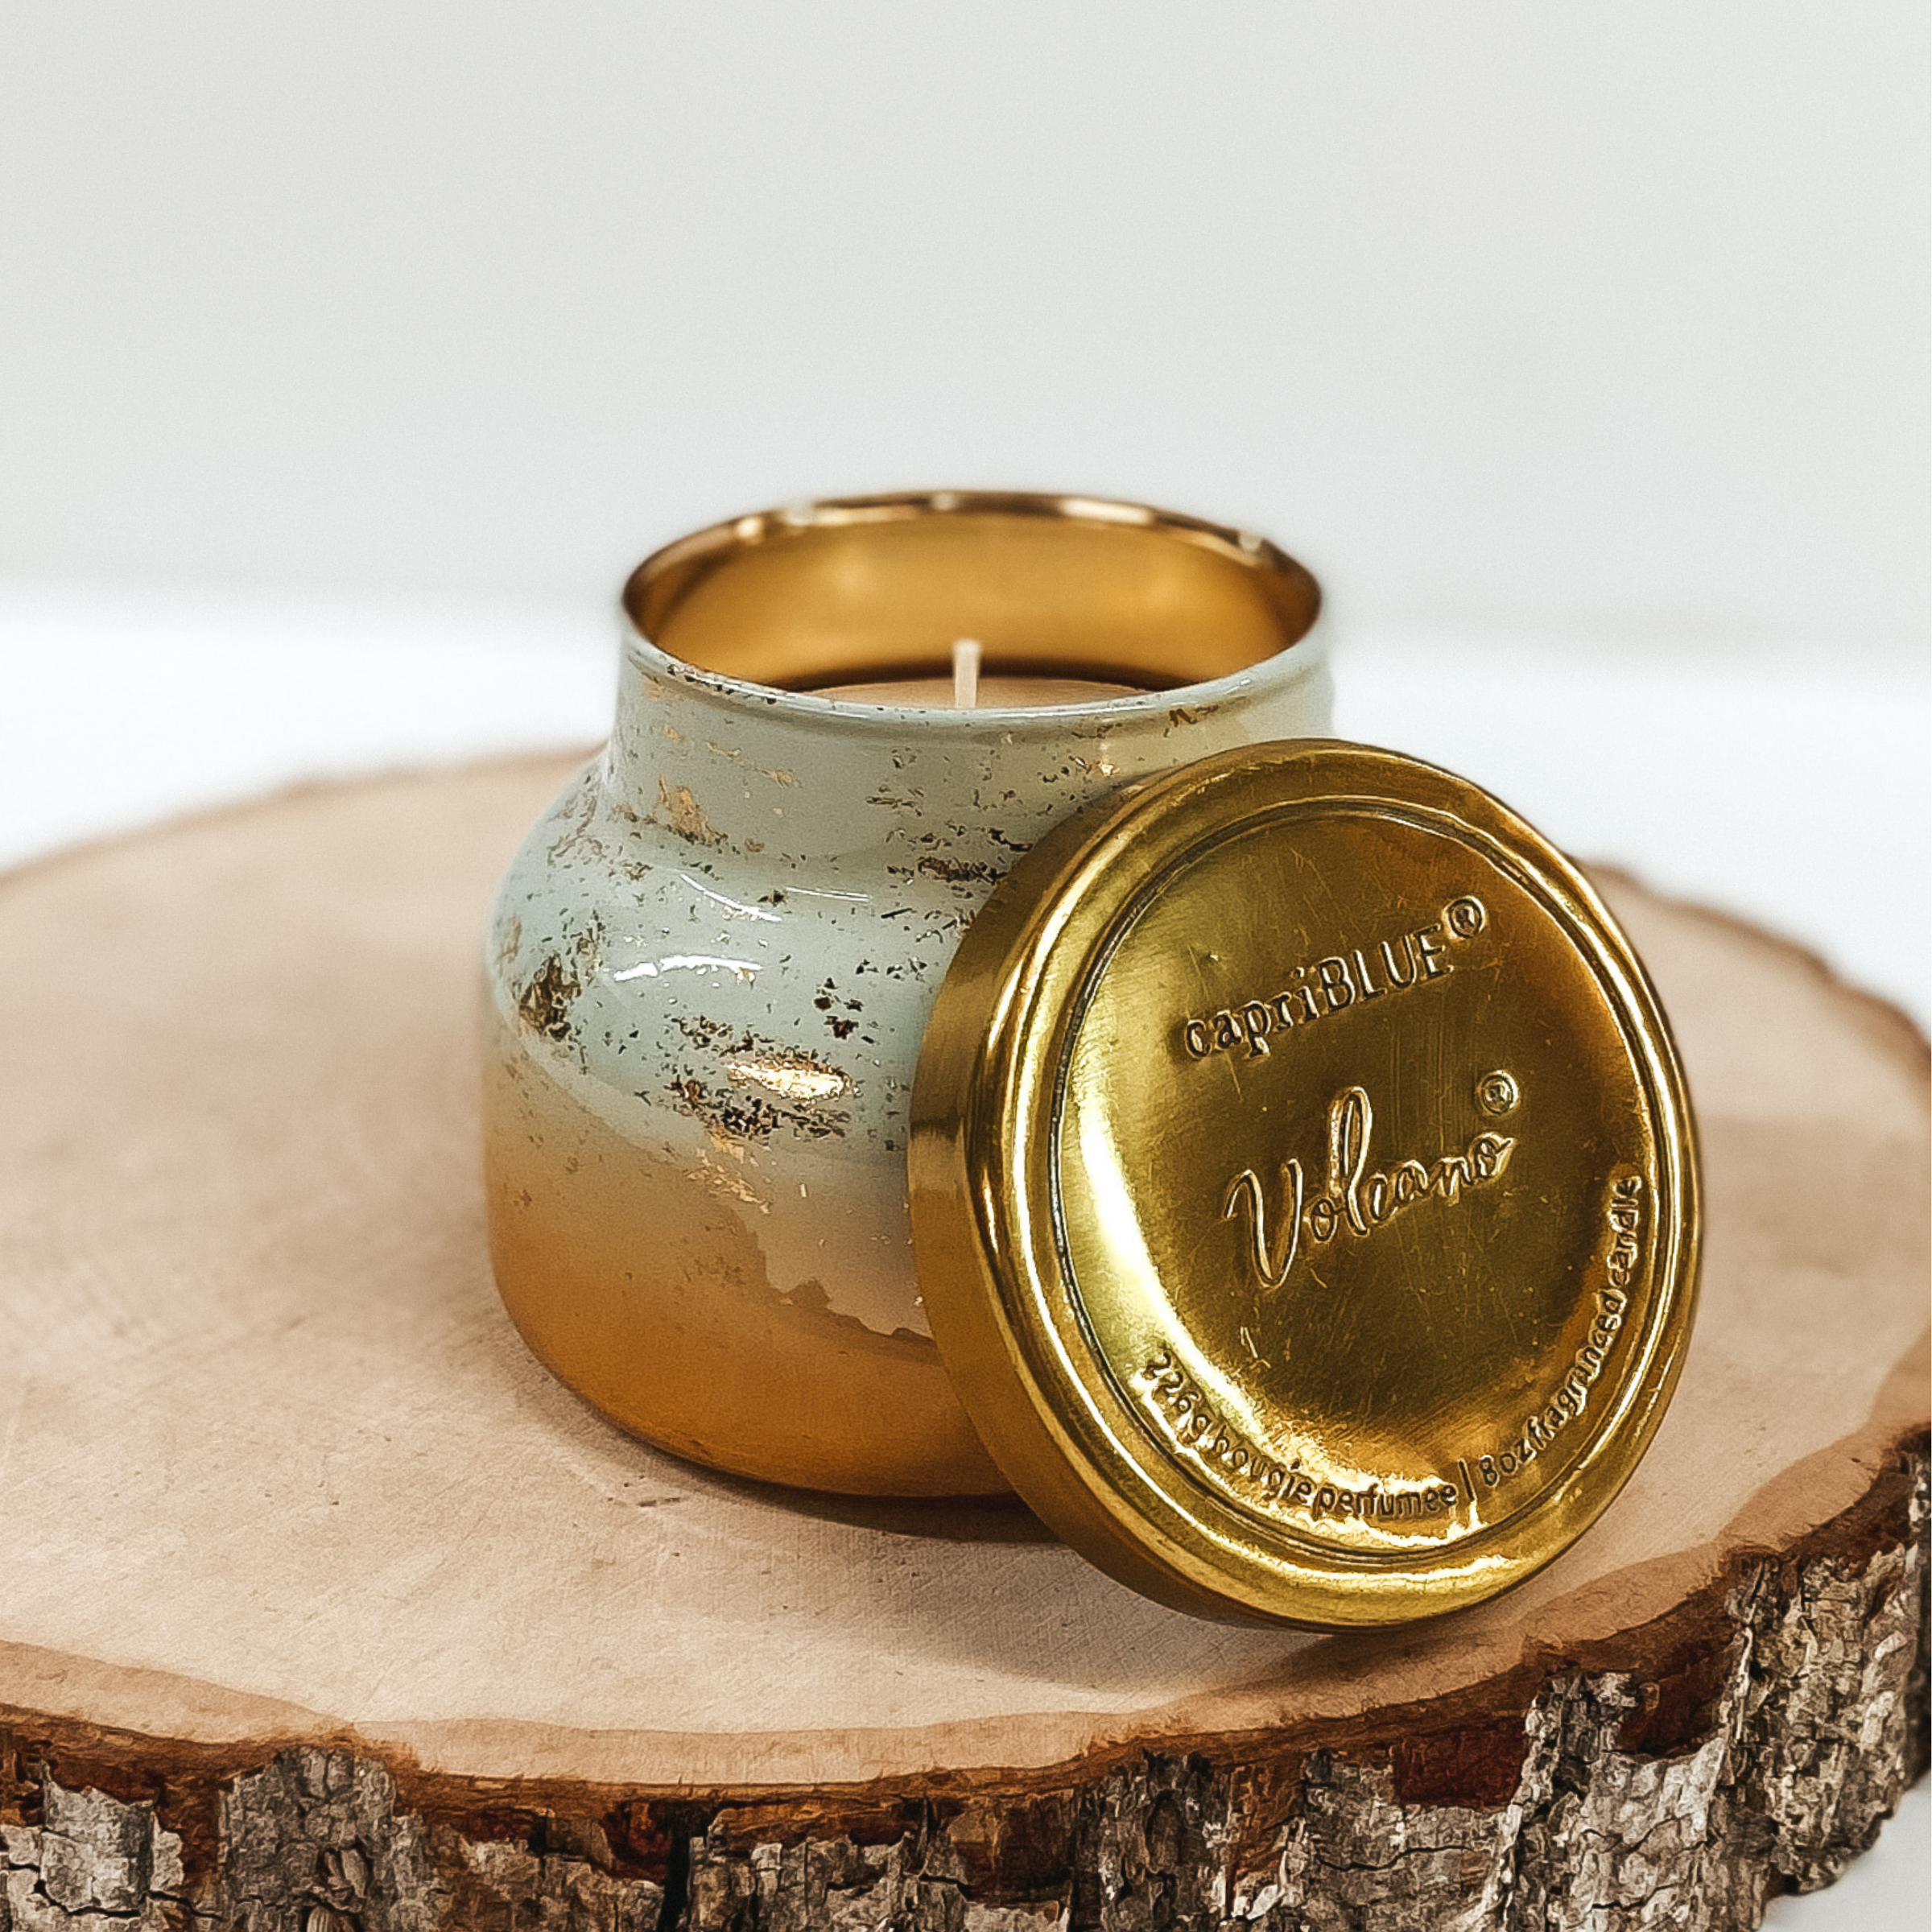 Capri Blue | 8 oz. Glimmer Petite Jar Candle in Gold | Volcano - Giddy Up Glamour Boutique